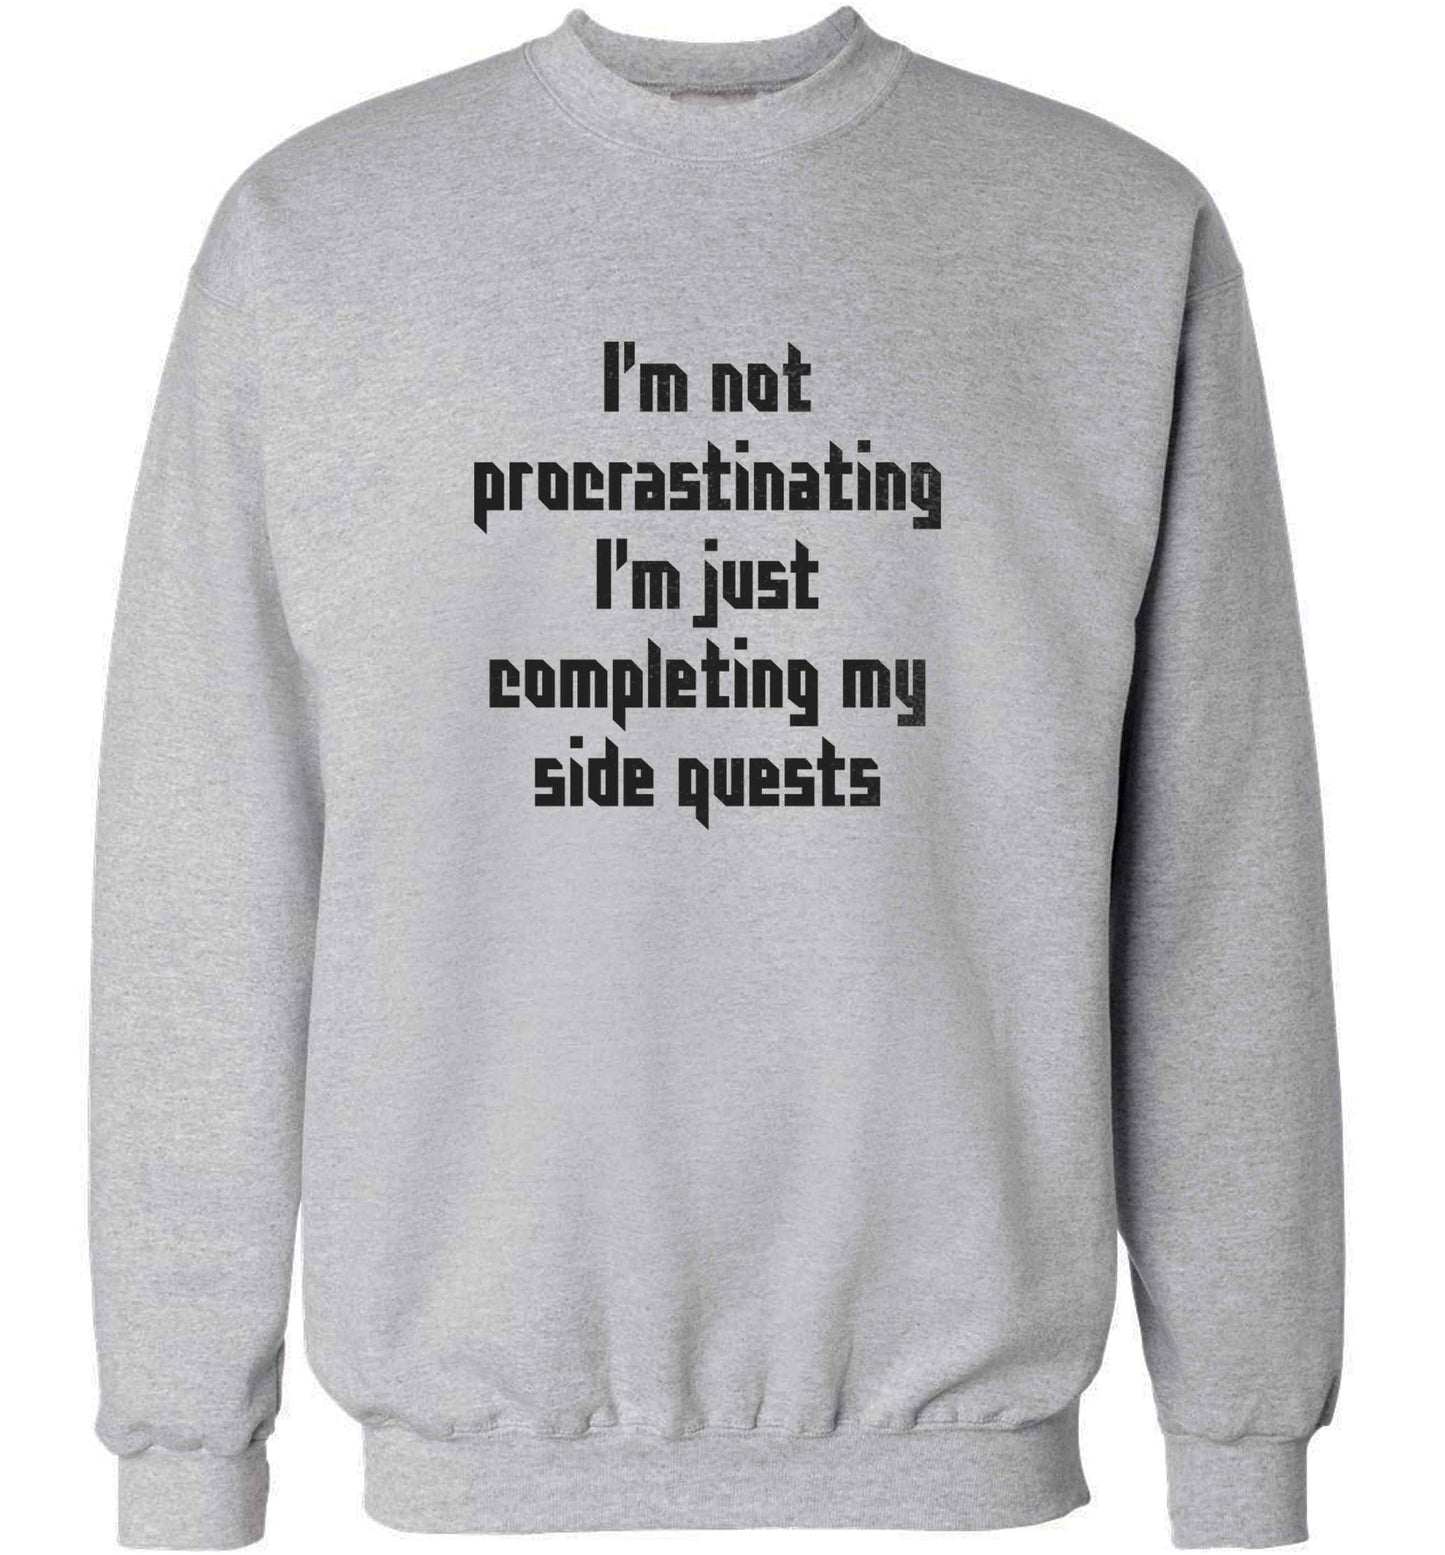 I'm not procrastinating I'm just completing my side quests adult's unisex grey sweater 2XL